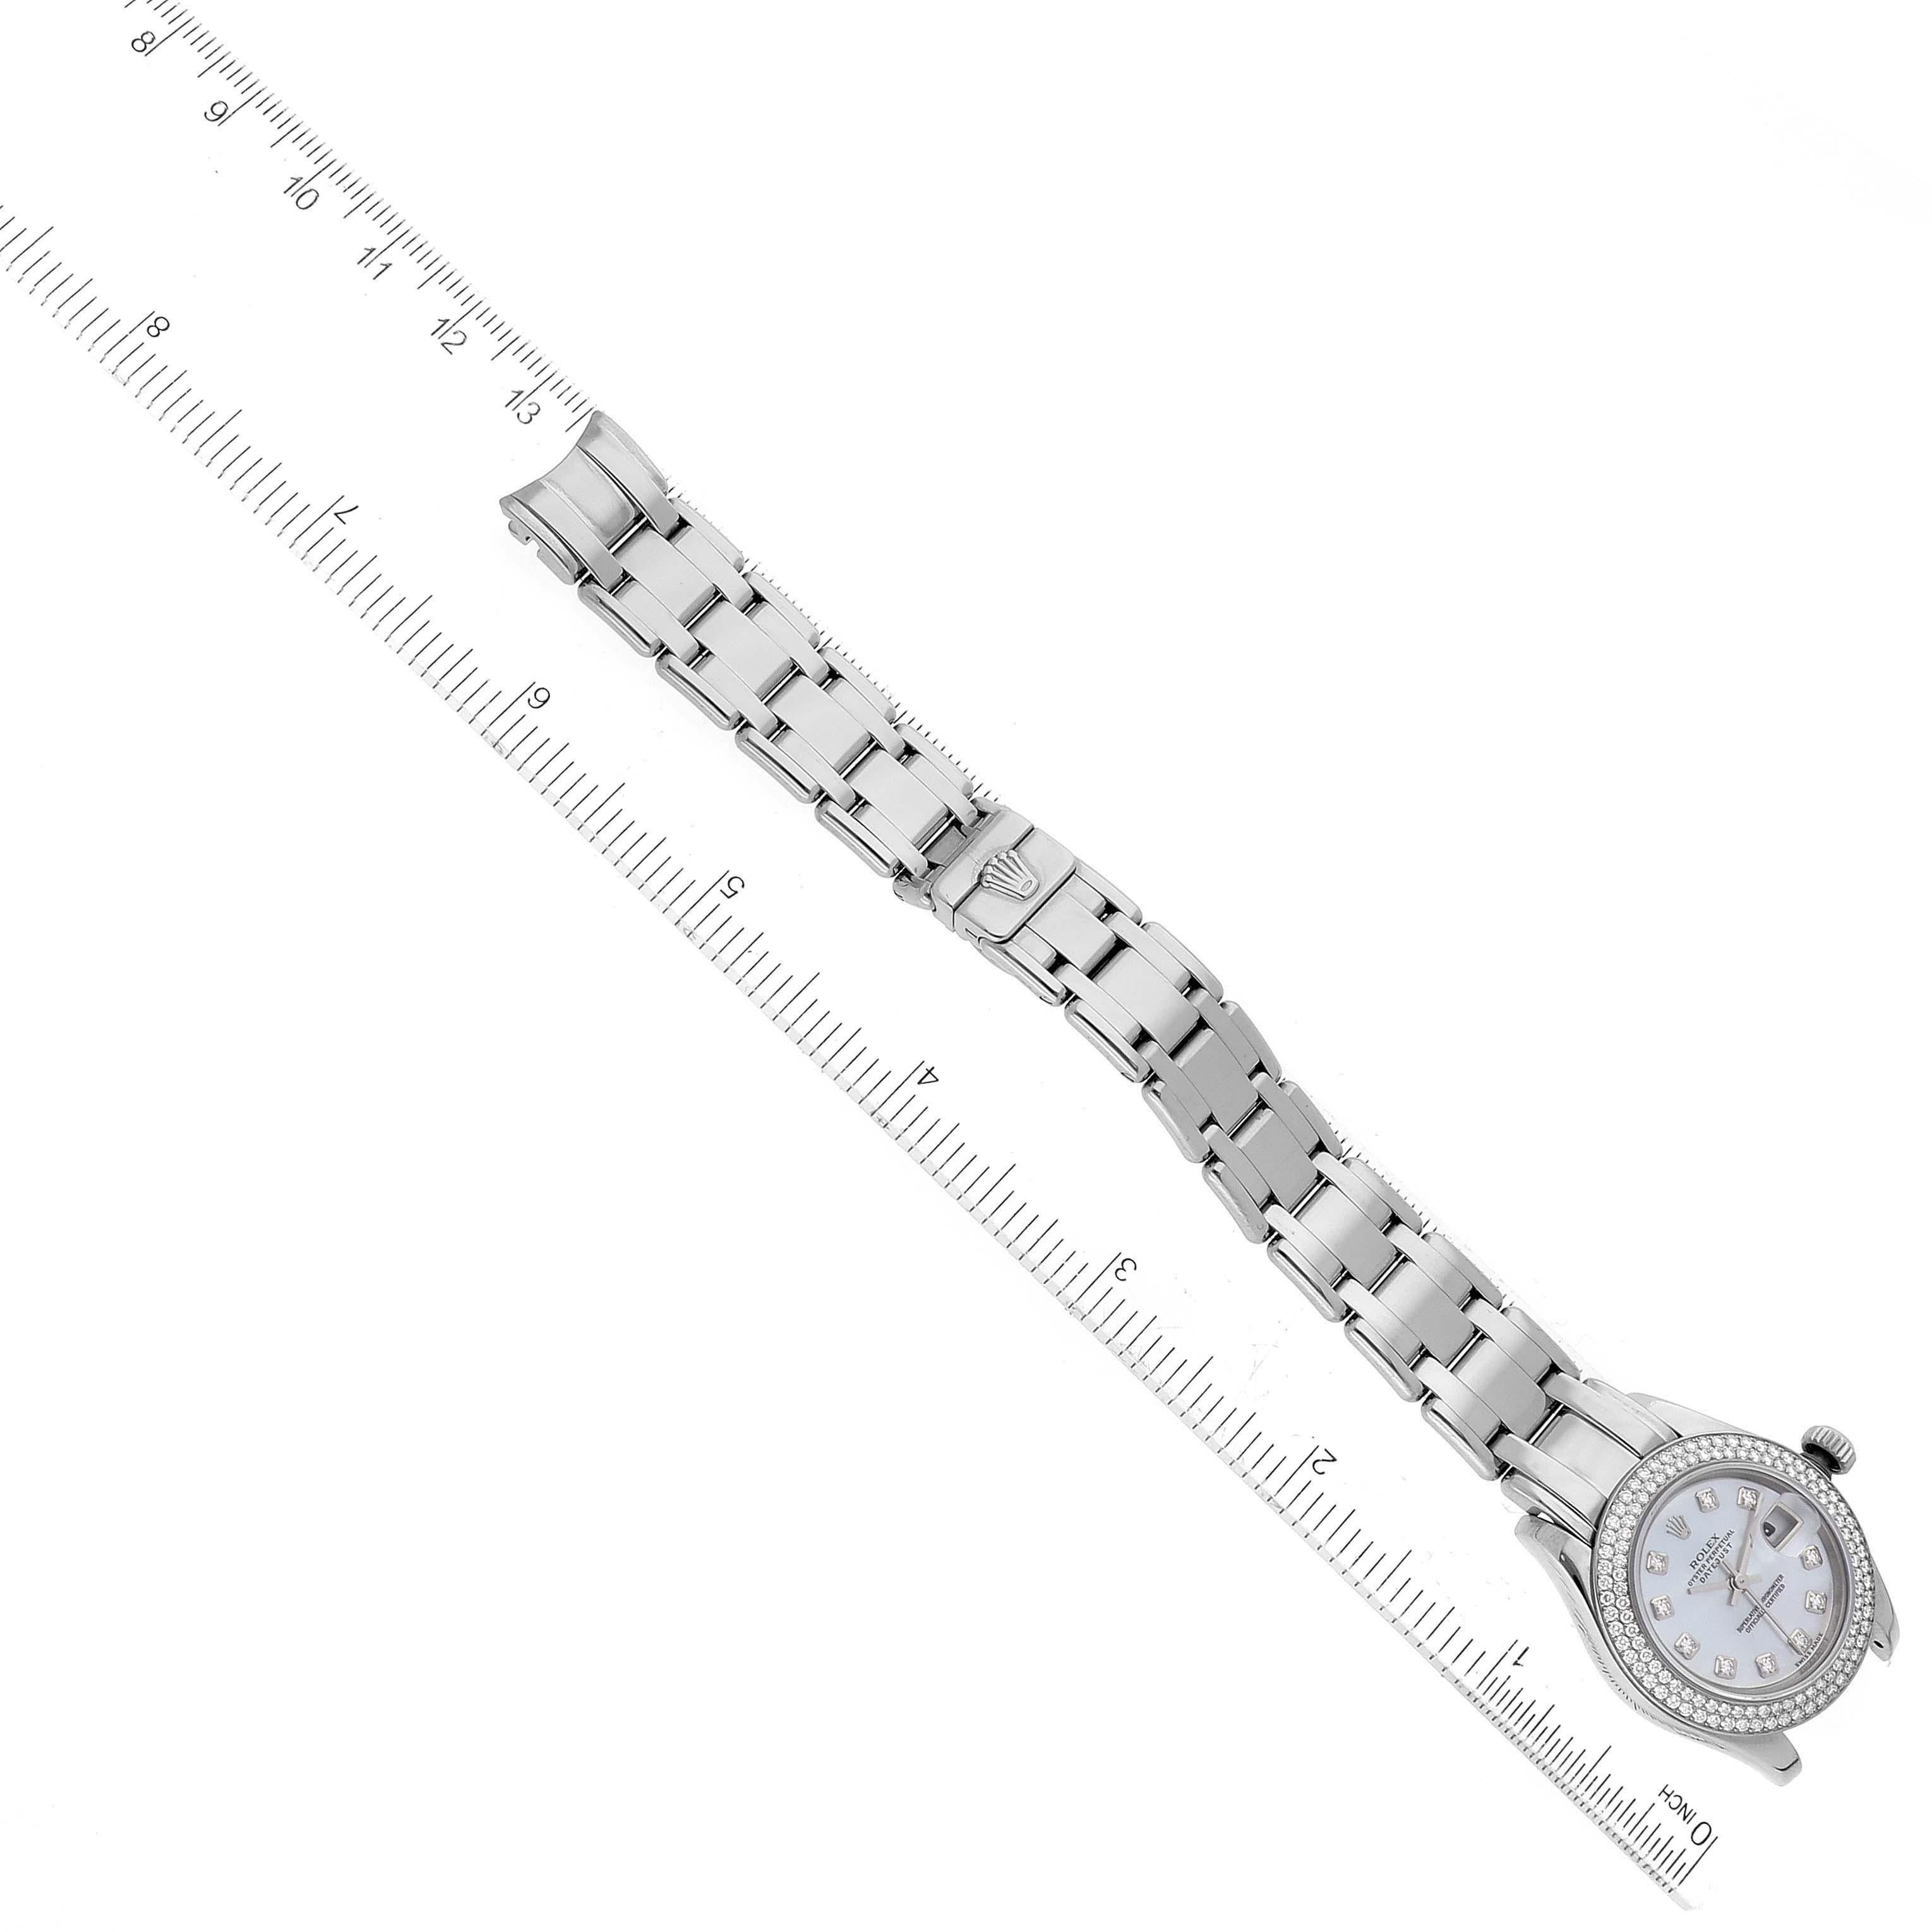 Rolex Pearlmaster White Gold MOP Diamond Ladies Watch 80339 Box Papers 7